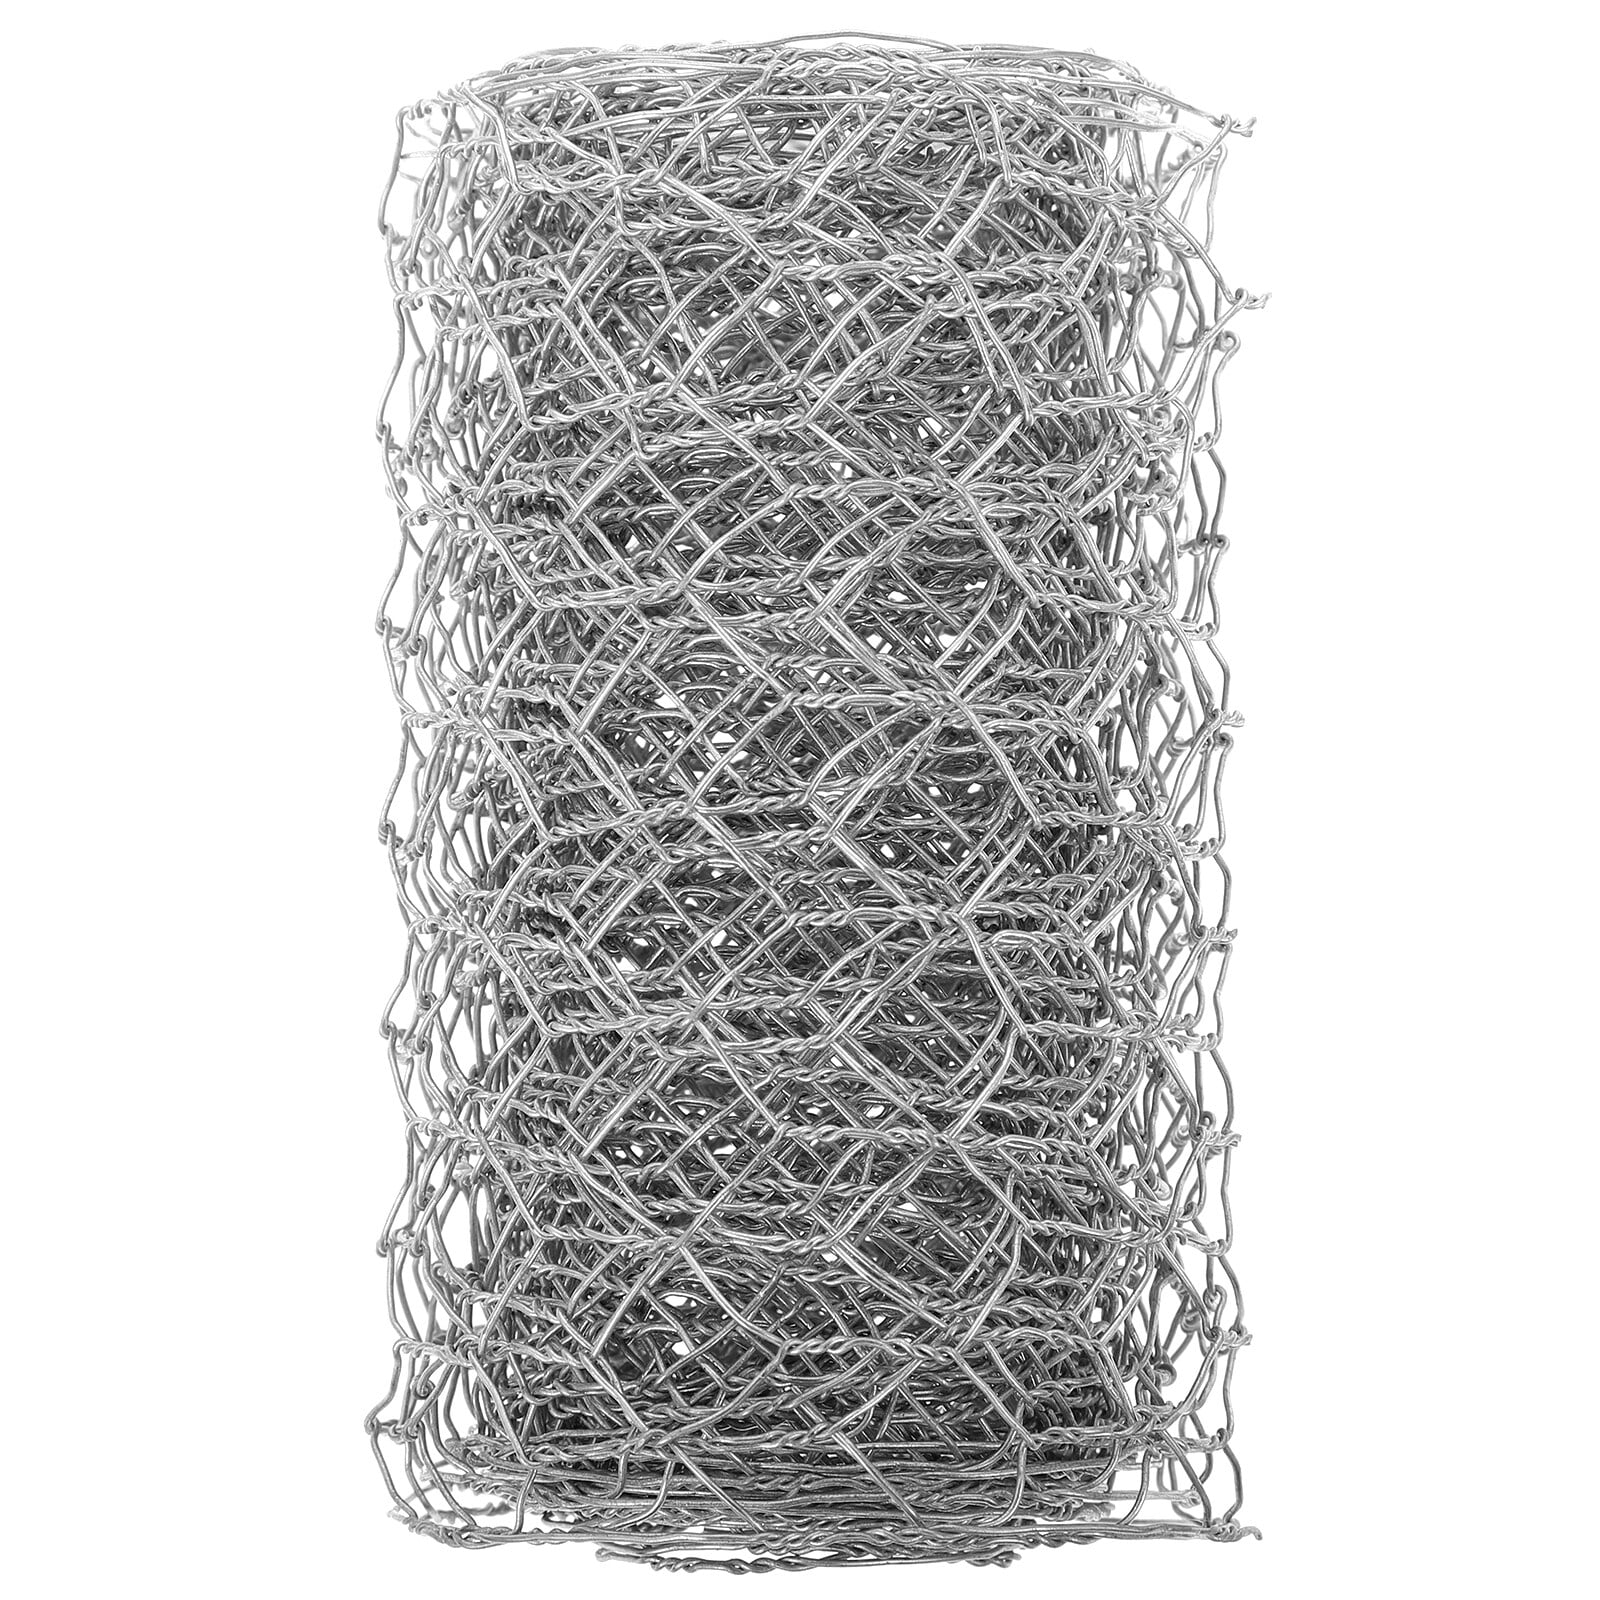 Chicken Wire Fencing Poultry Wire Mesh Fence Yard Garden Crafting Decor, Size: 500X10X10CM